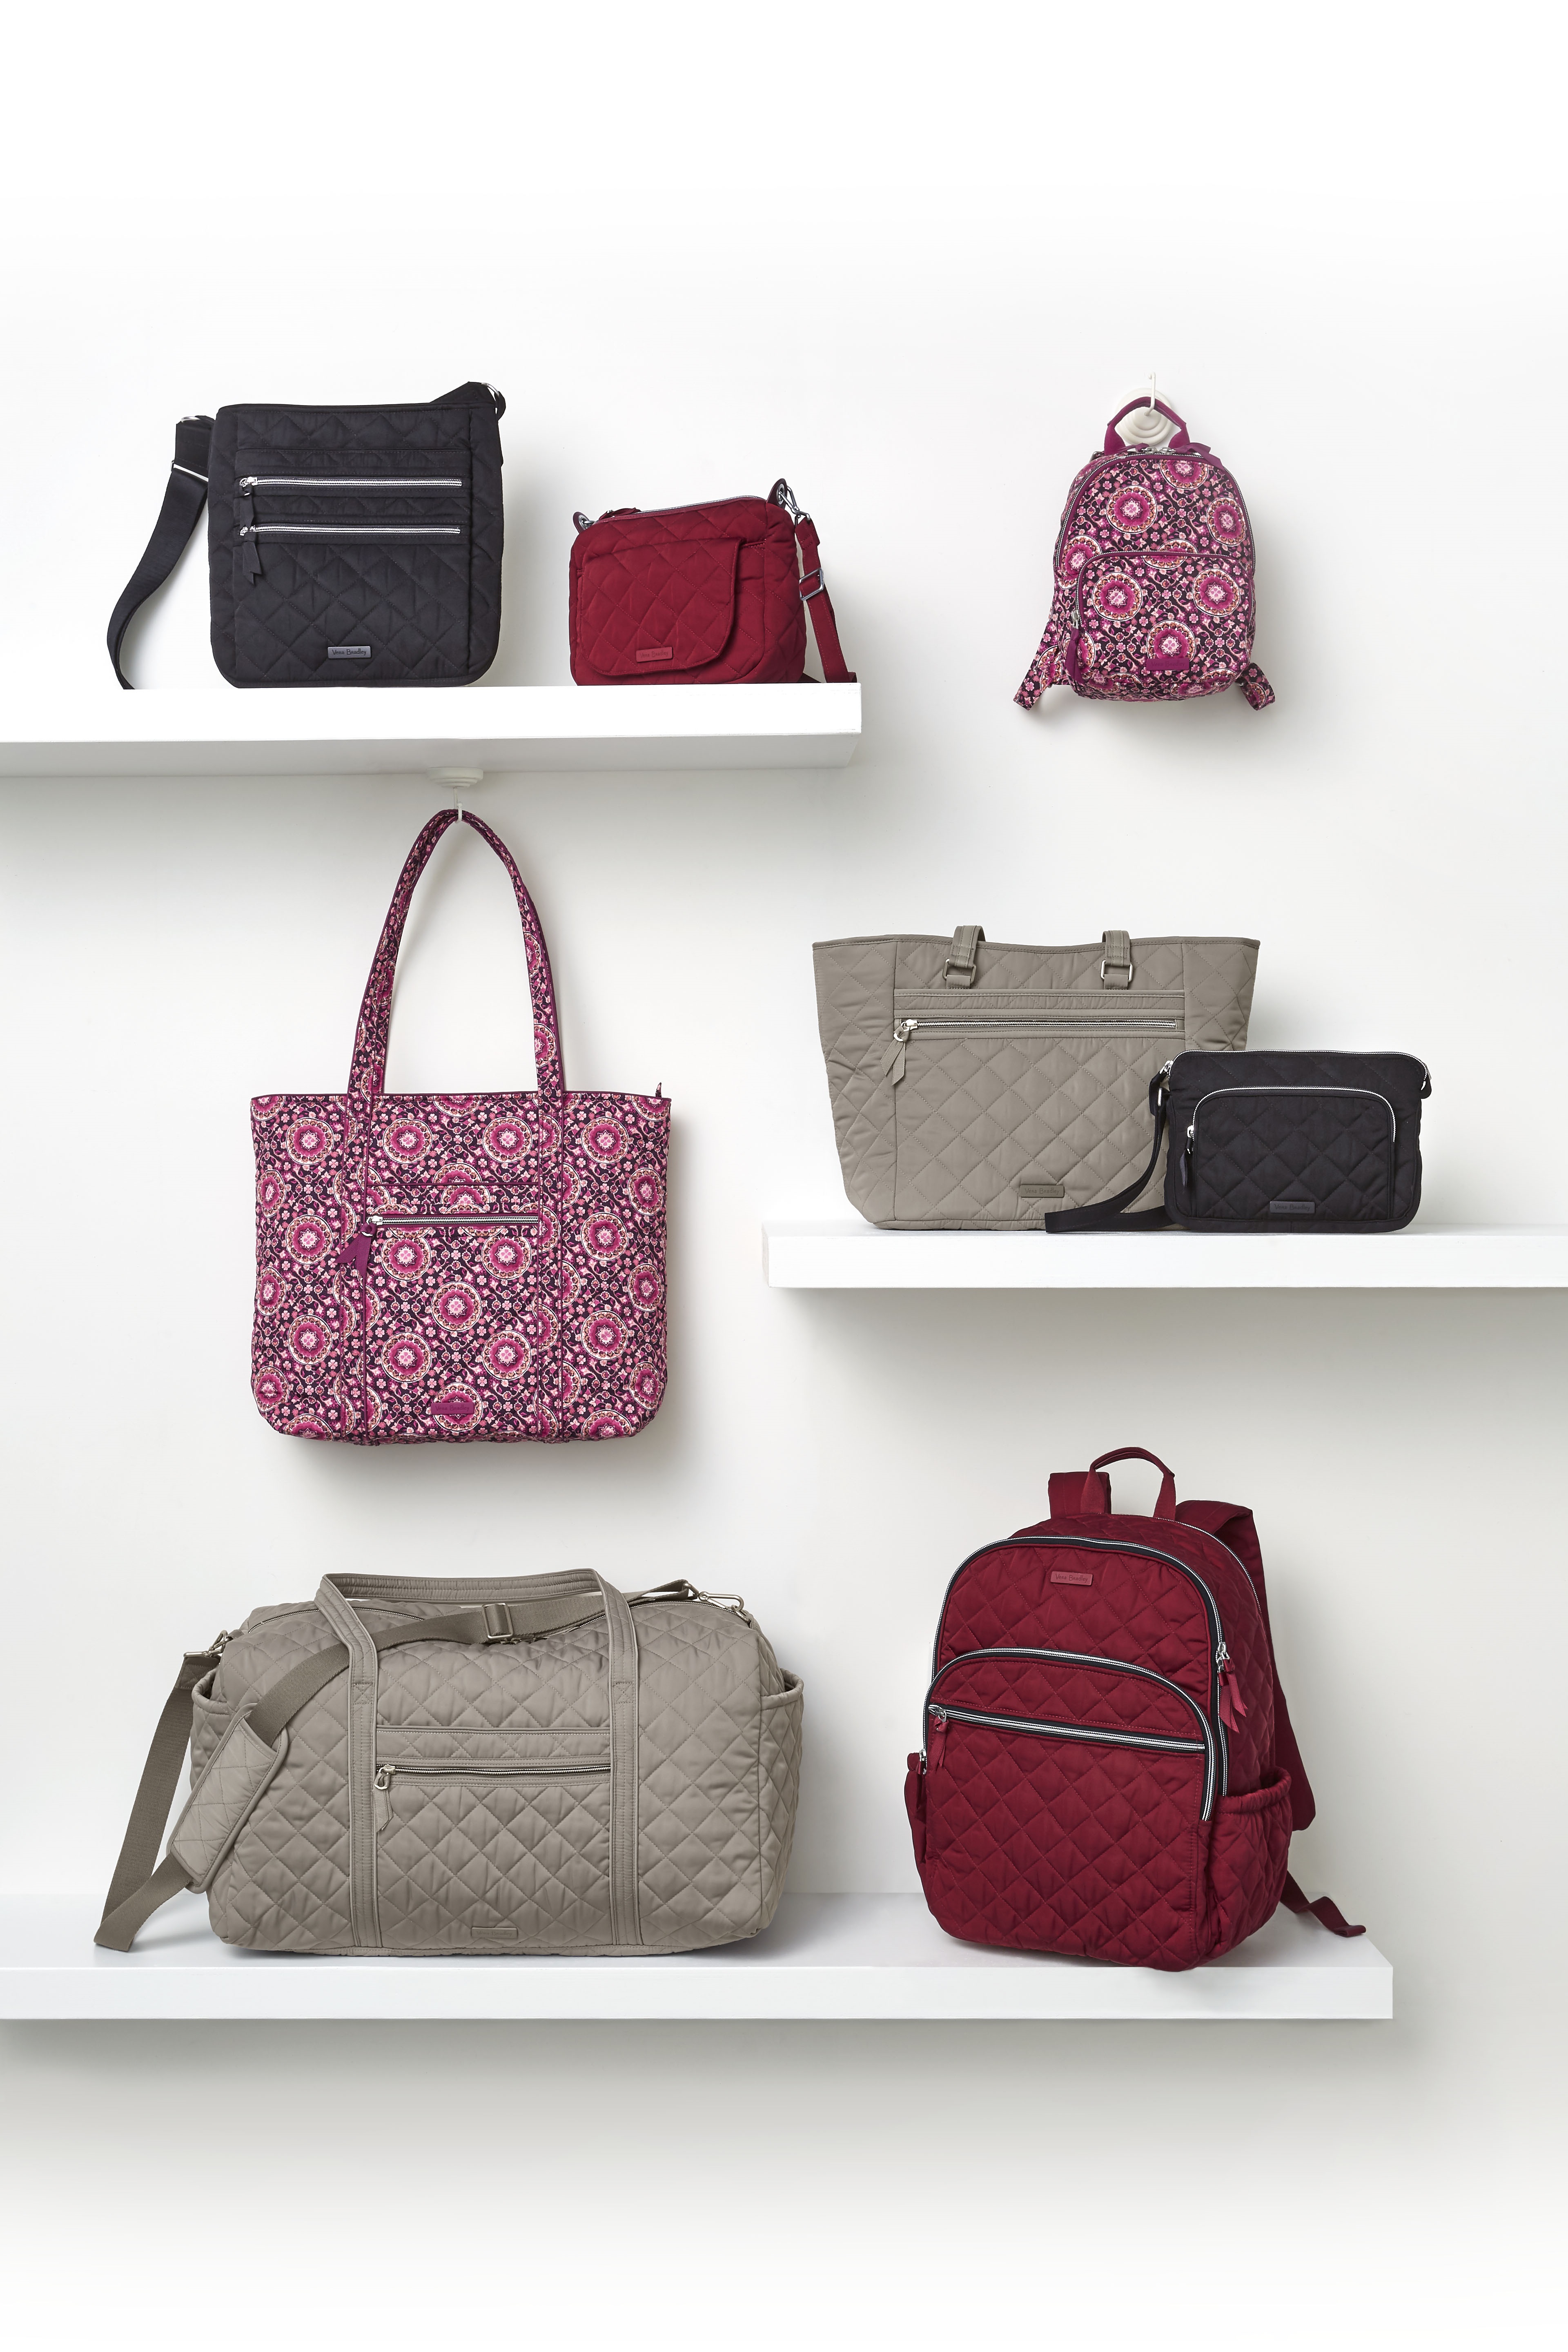 Vera Bradley Launches New Performance Twill Collection